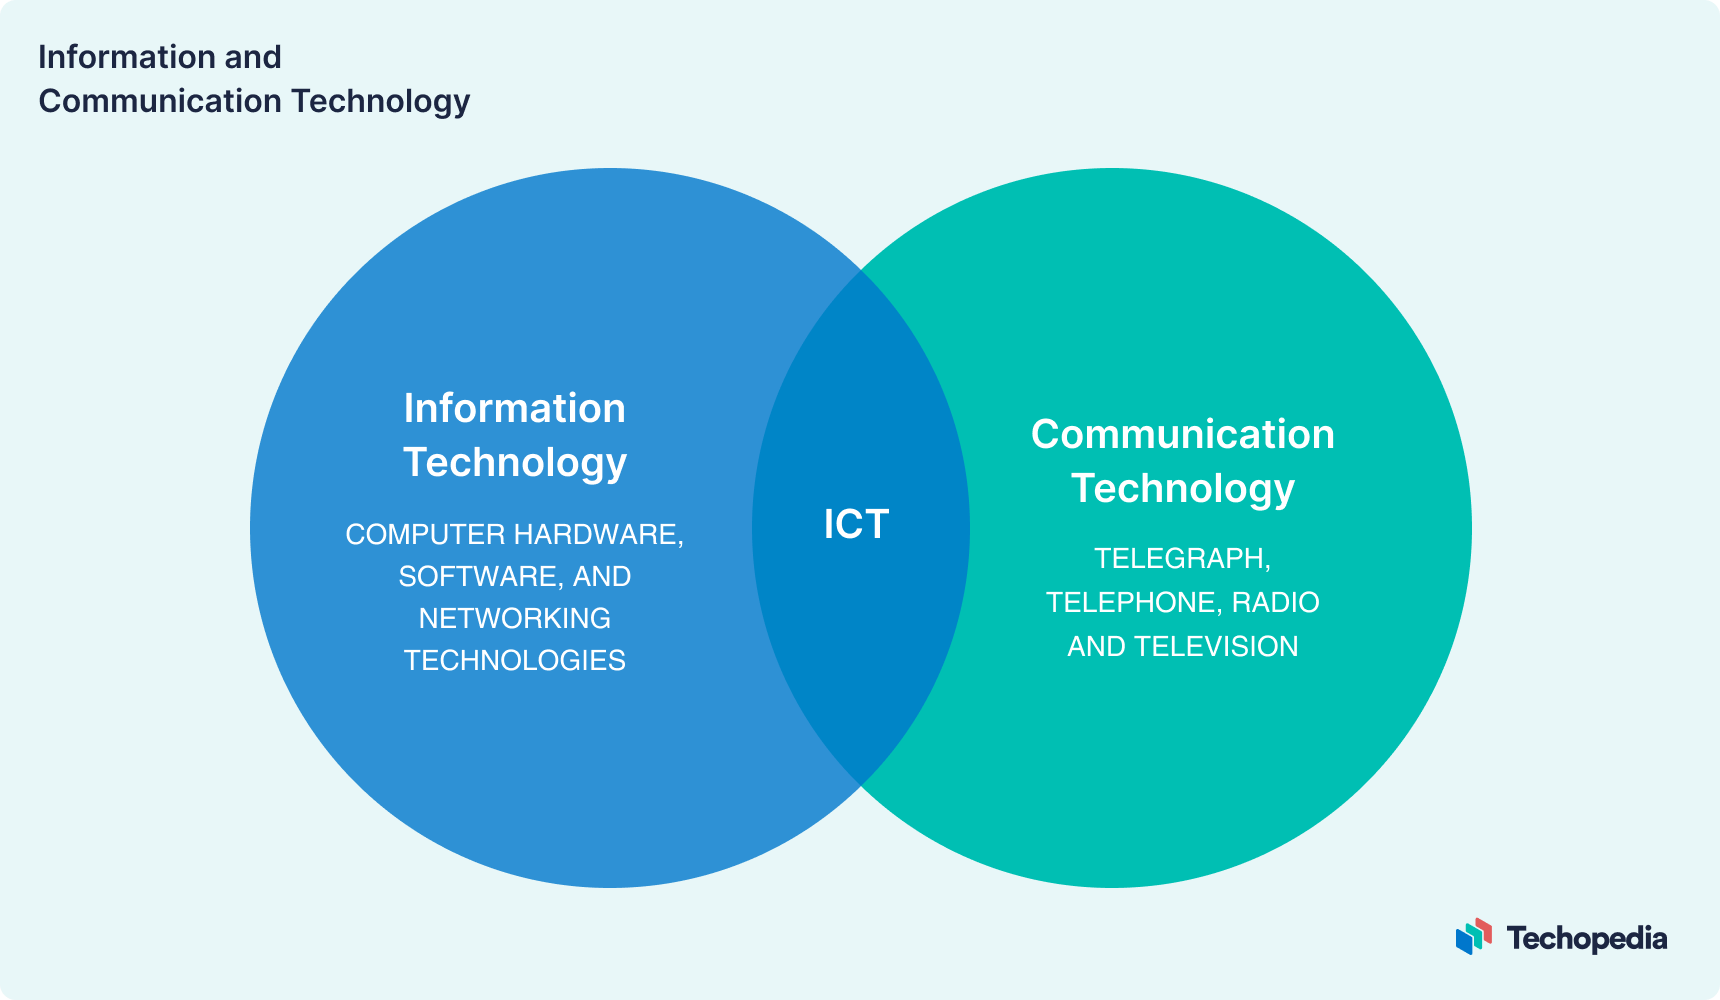 ICT is the intersection of Information Technology and Communication Technology